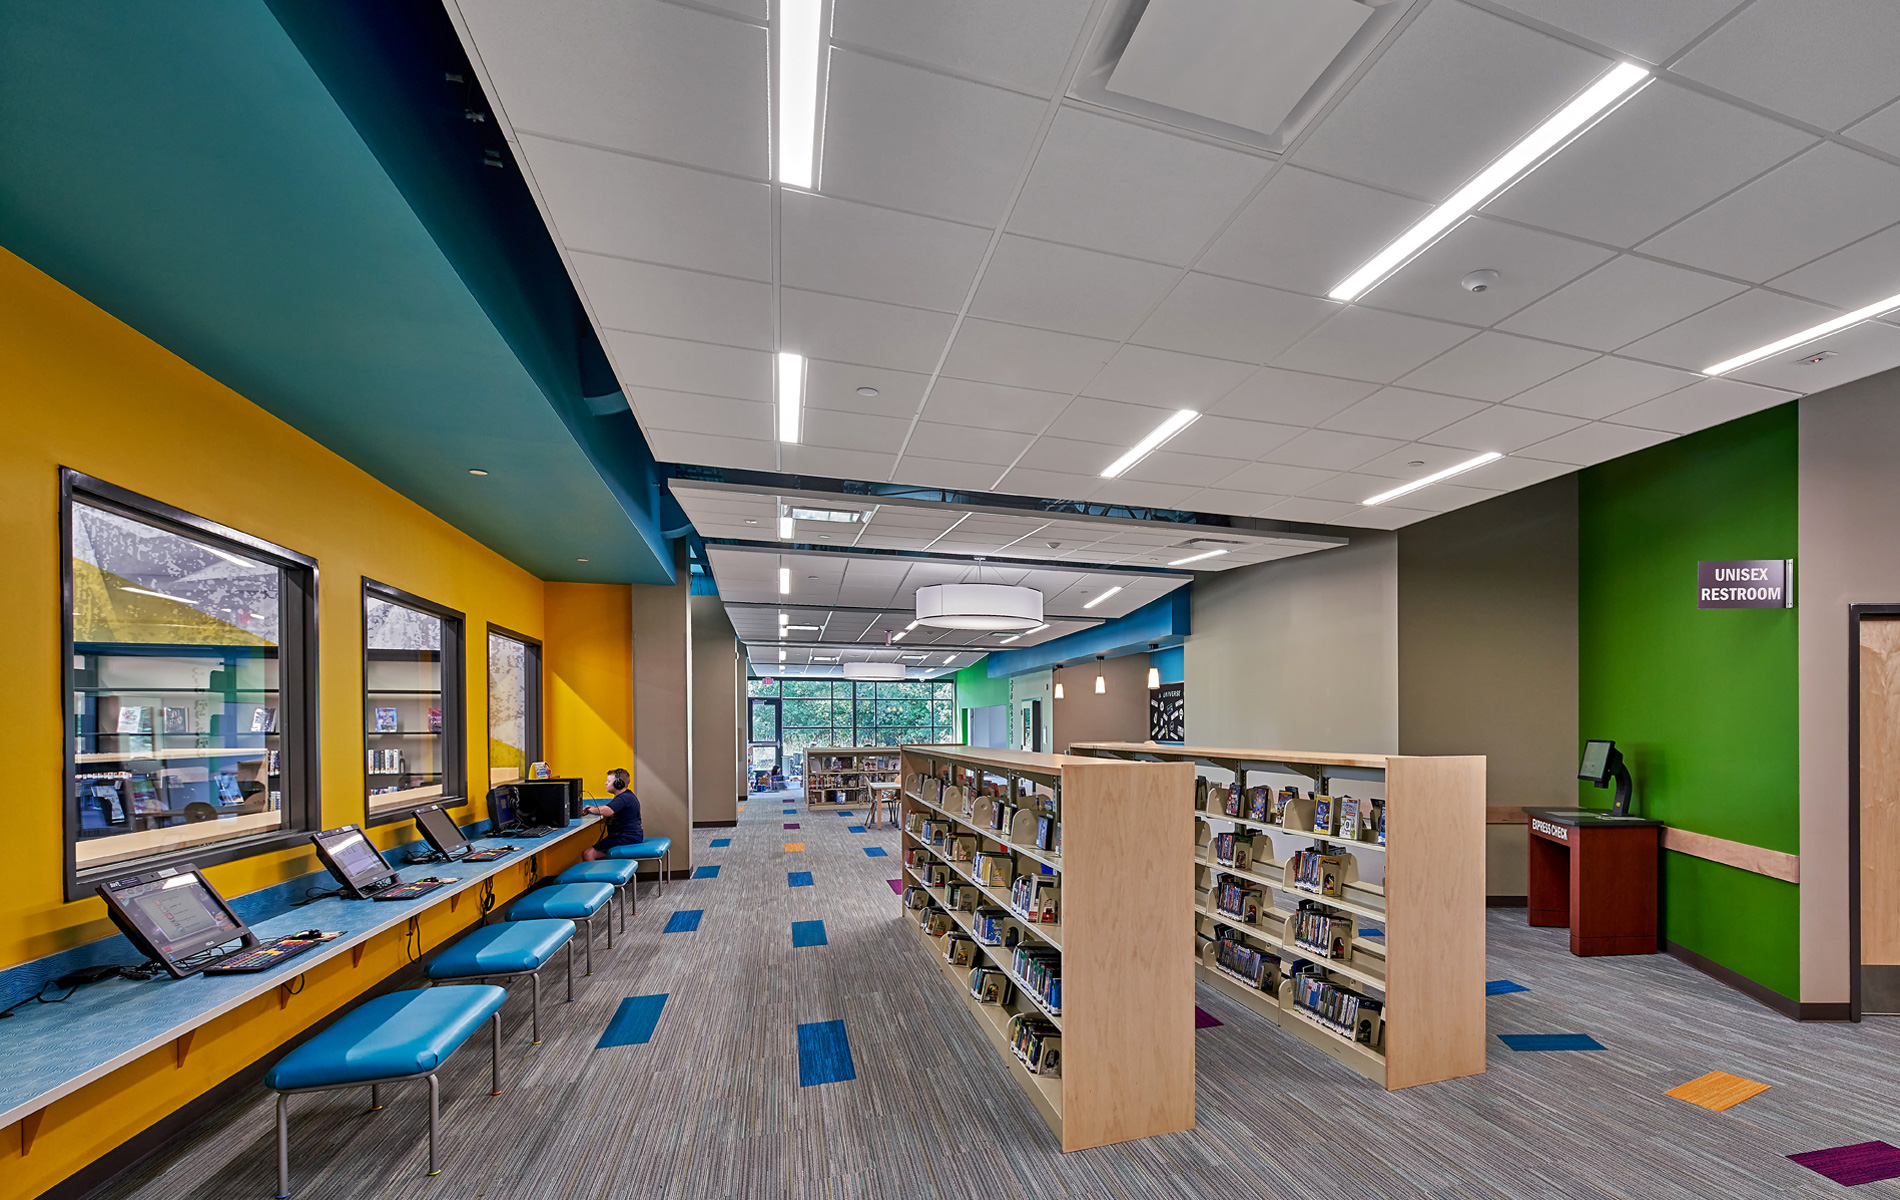 Image of interior of White Lake Library childrens' section